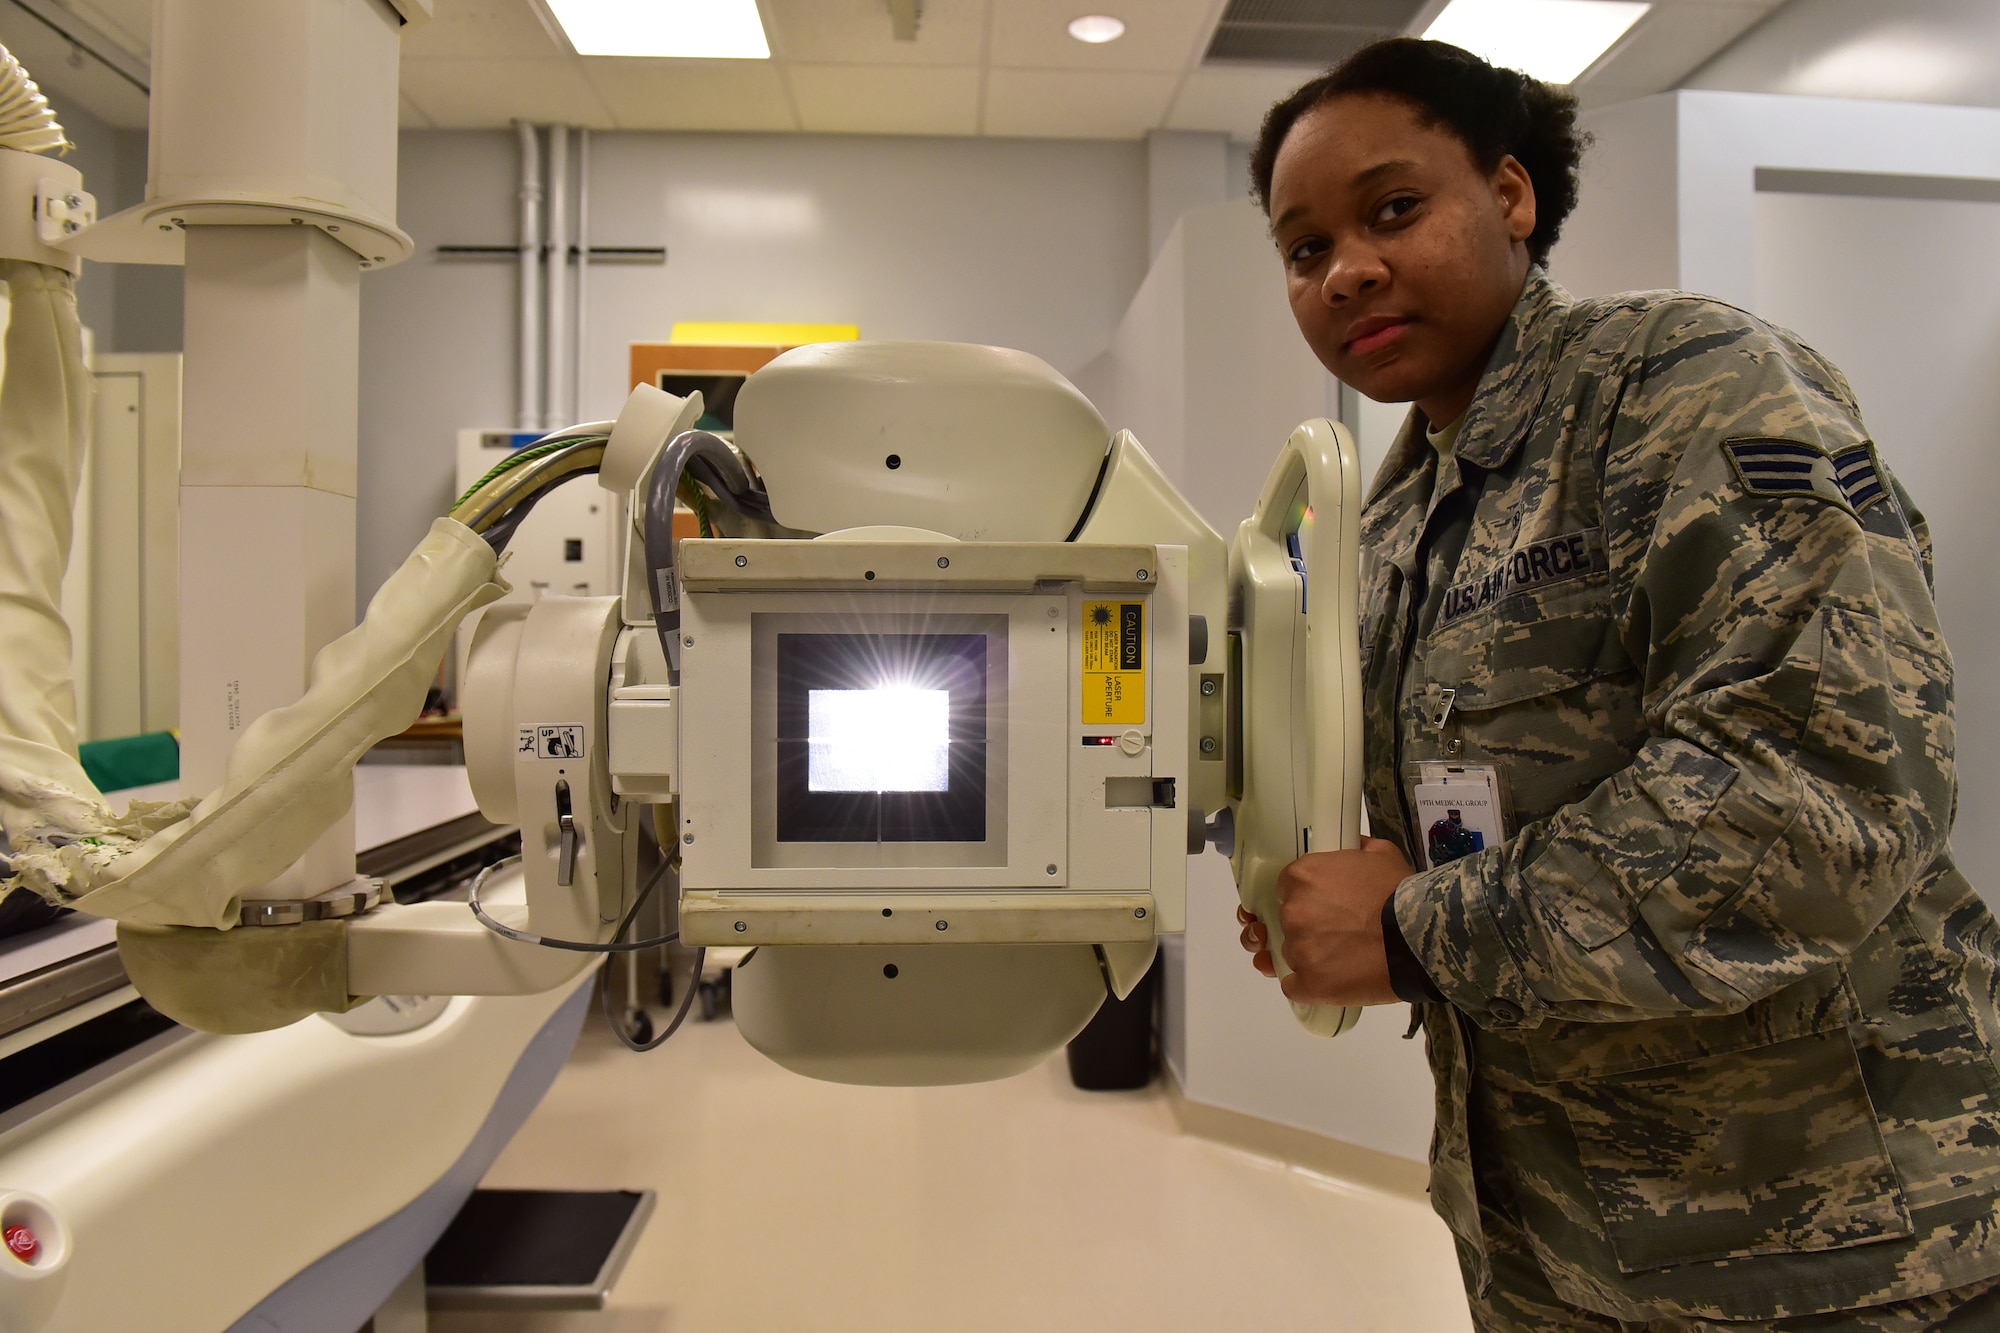 Senior Airman Akilah Hall, 19th Medical Support Squadron diagnostic imaging technologist, aims an X-ray tube at a target Dec. 8, 2017, at Little Rock Air Force Base, Ark.  The X-ray tube has to be warmed up and calibrated before it can be used. The proper exposure must also be found for specific parts of the body. (U.S. Air Force photo by Airman 1st Class Rhett Isbell)